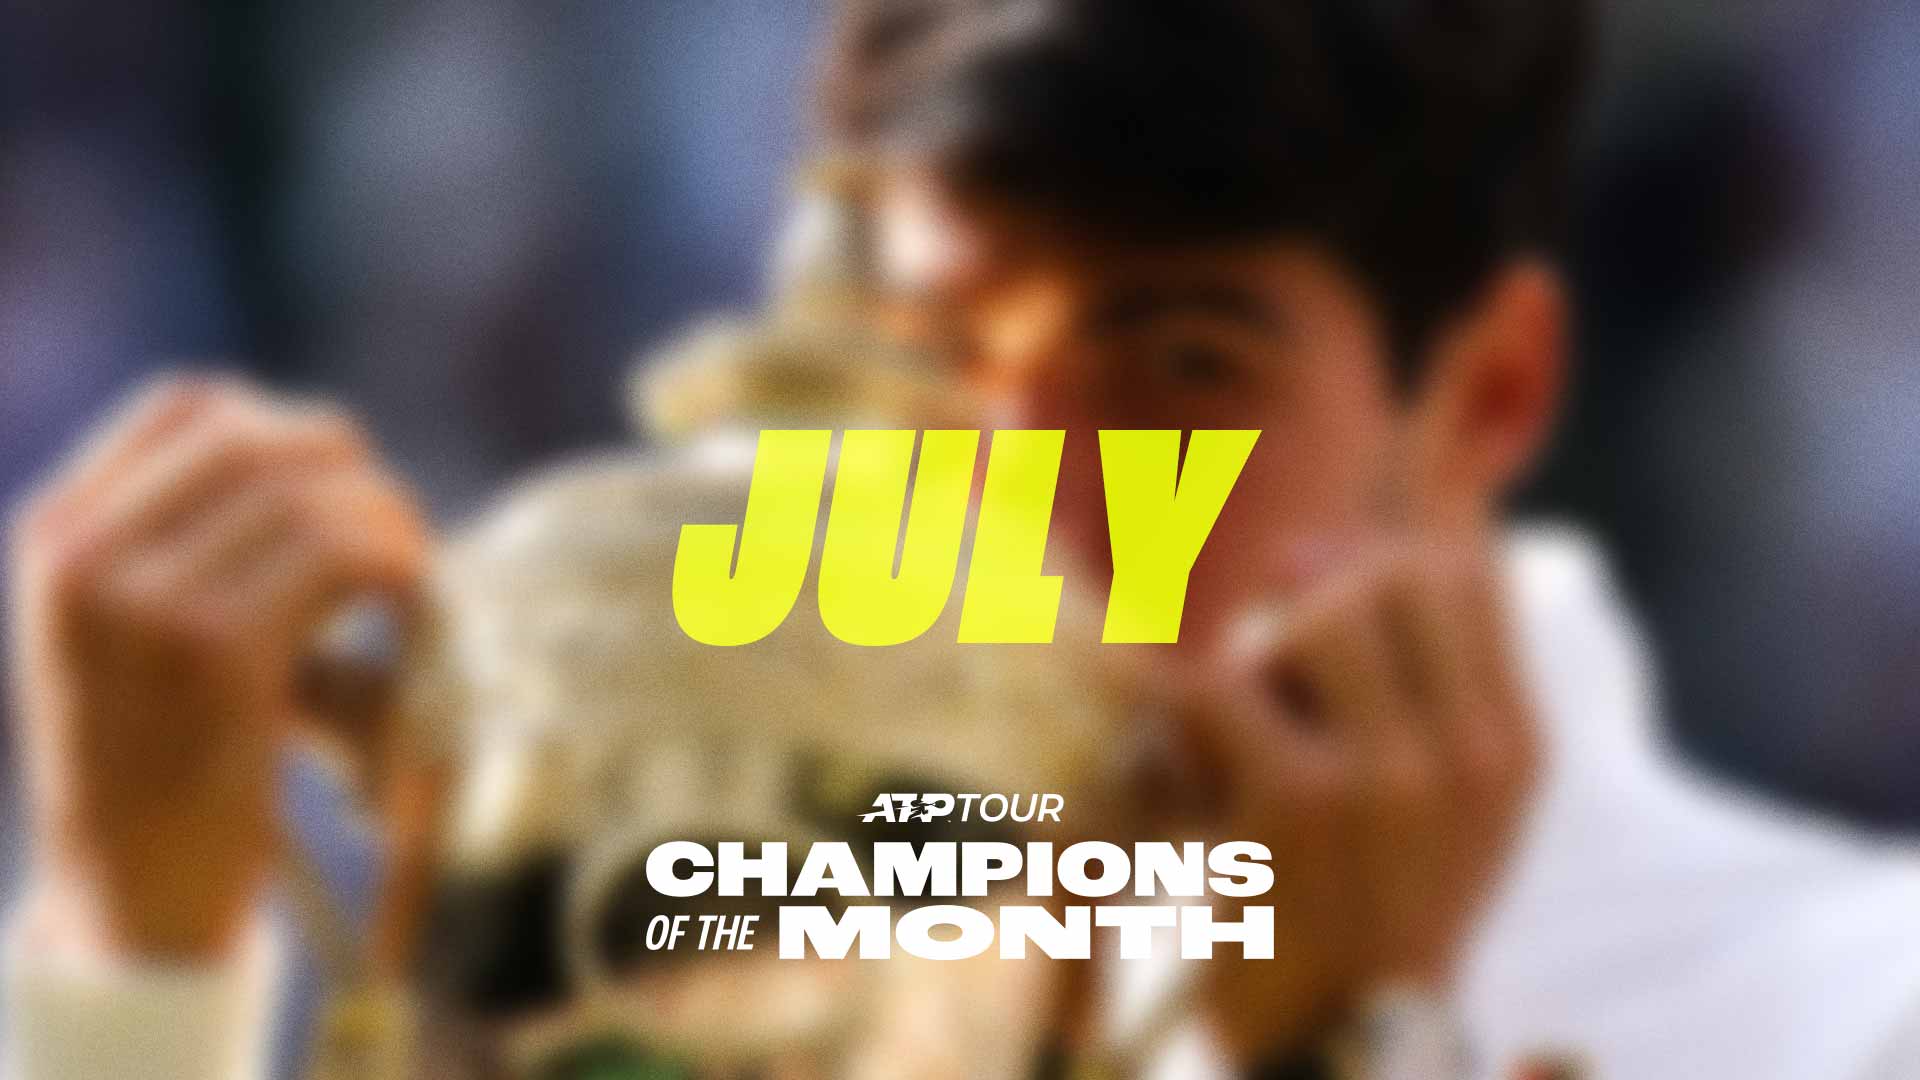 Champions of the Month: Alcaraz, Berrettini and title debutants make their mark